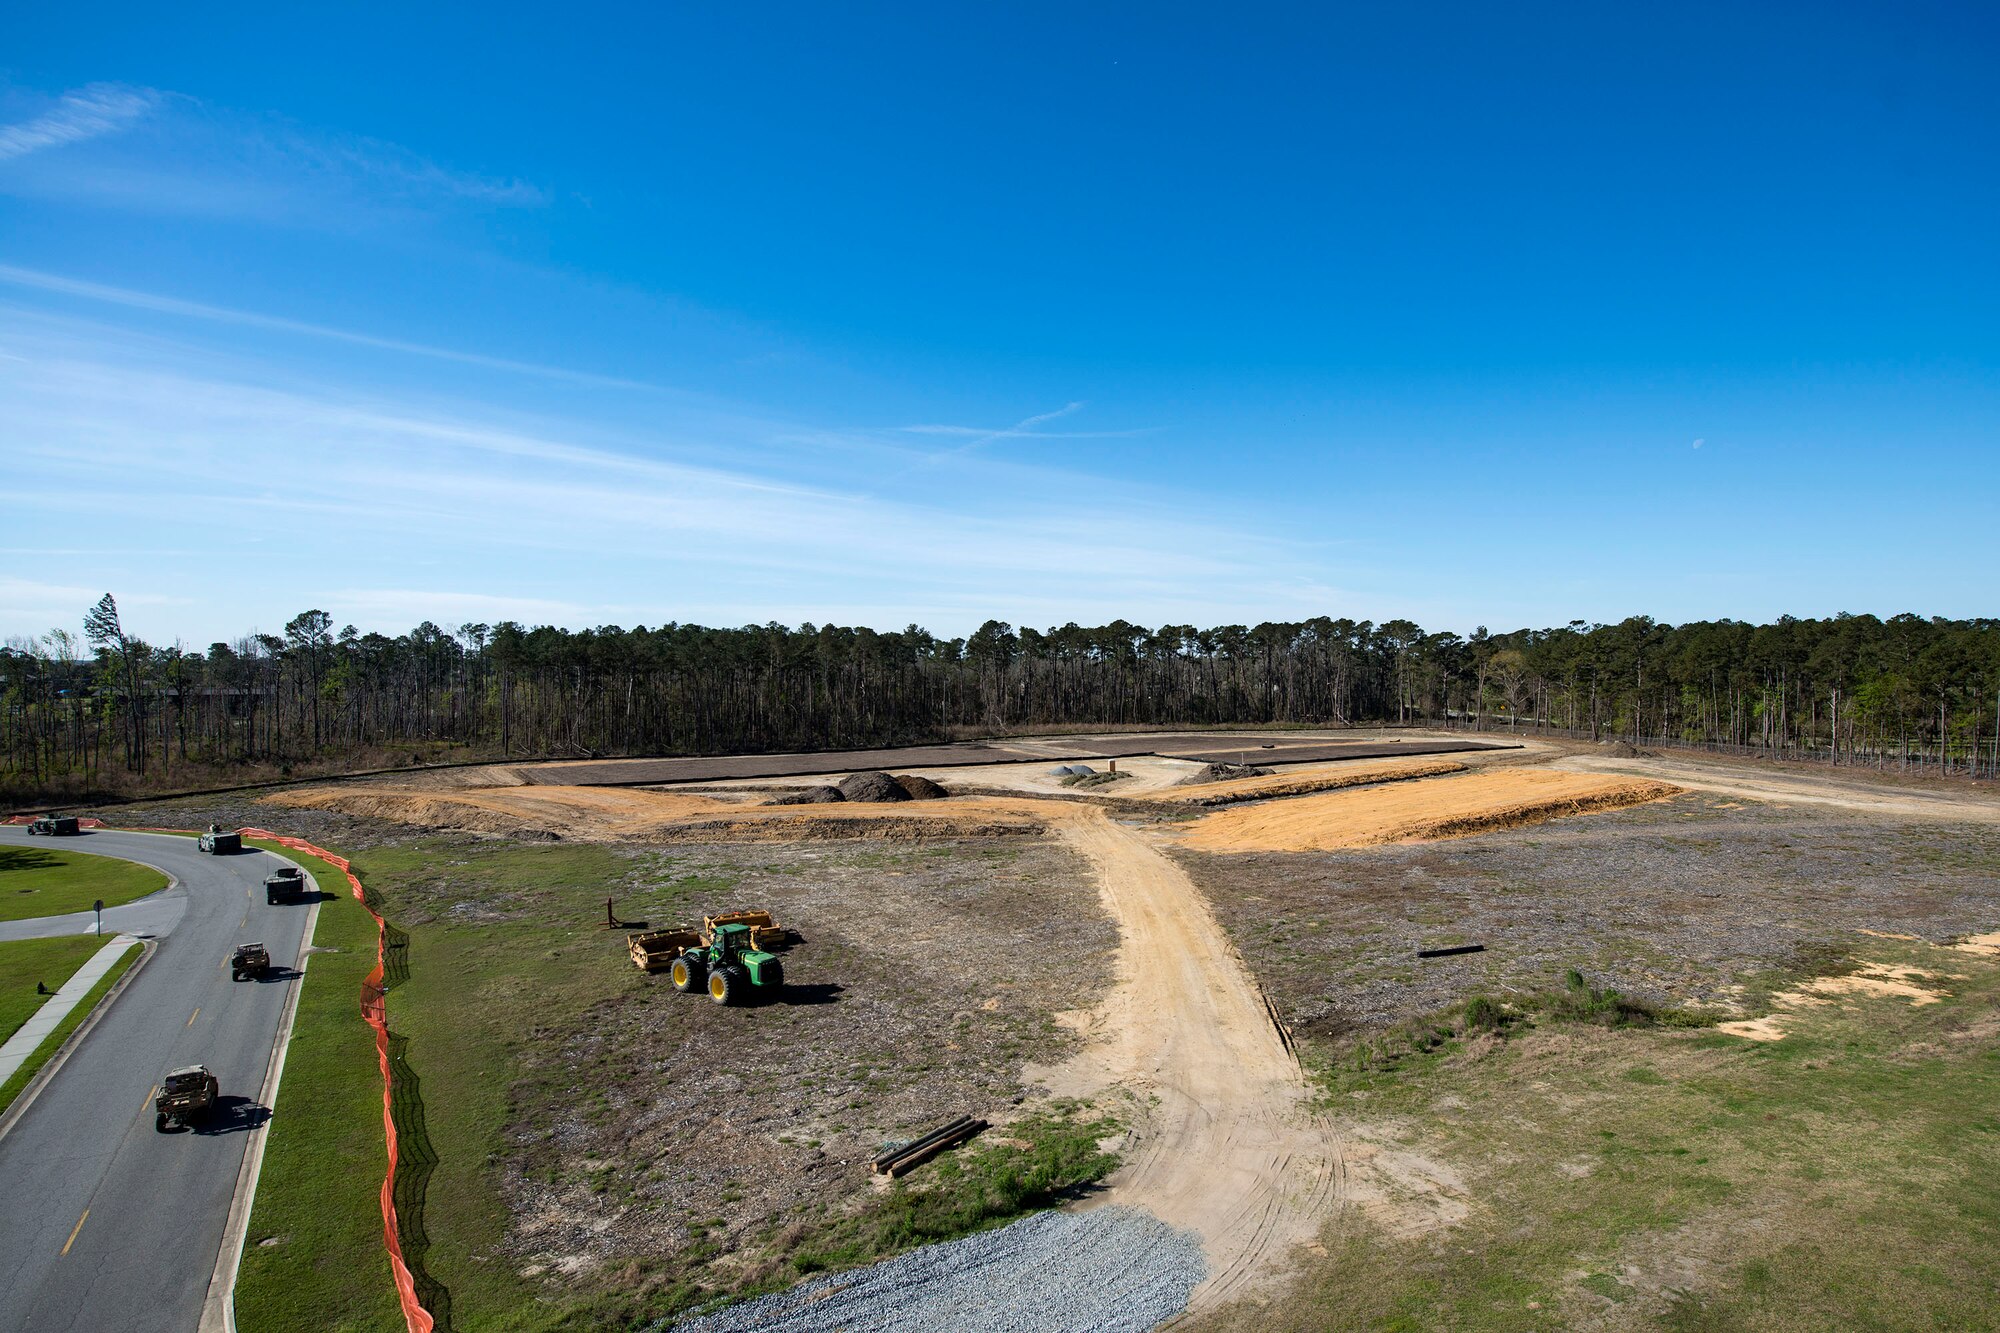 Vehicles drive past the construction site for the new rescue complex, March 7, 2018, at Moody Air Force Base, Ga. The base is improving the Guardian Angel’s capabilities by building them new facilities to group the rescue assets closer together, so as to help better prepare for the future of their mission of saving lives. (U.S. Air Force photo by Airman 1st Class Erick Requadt)